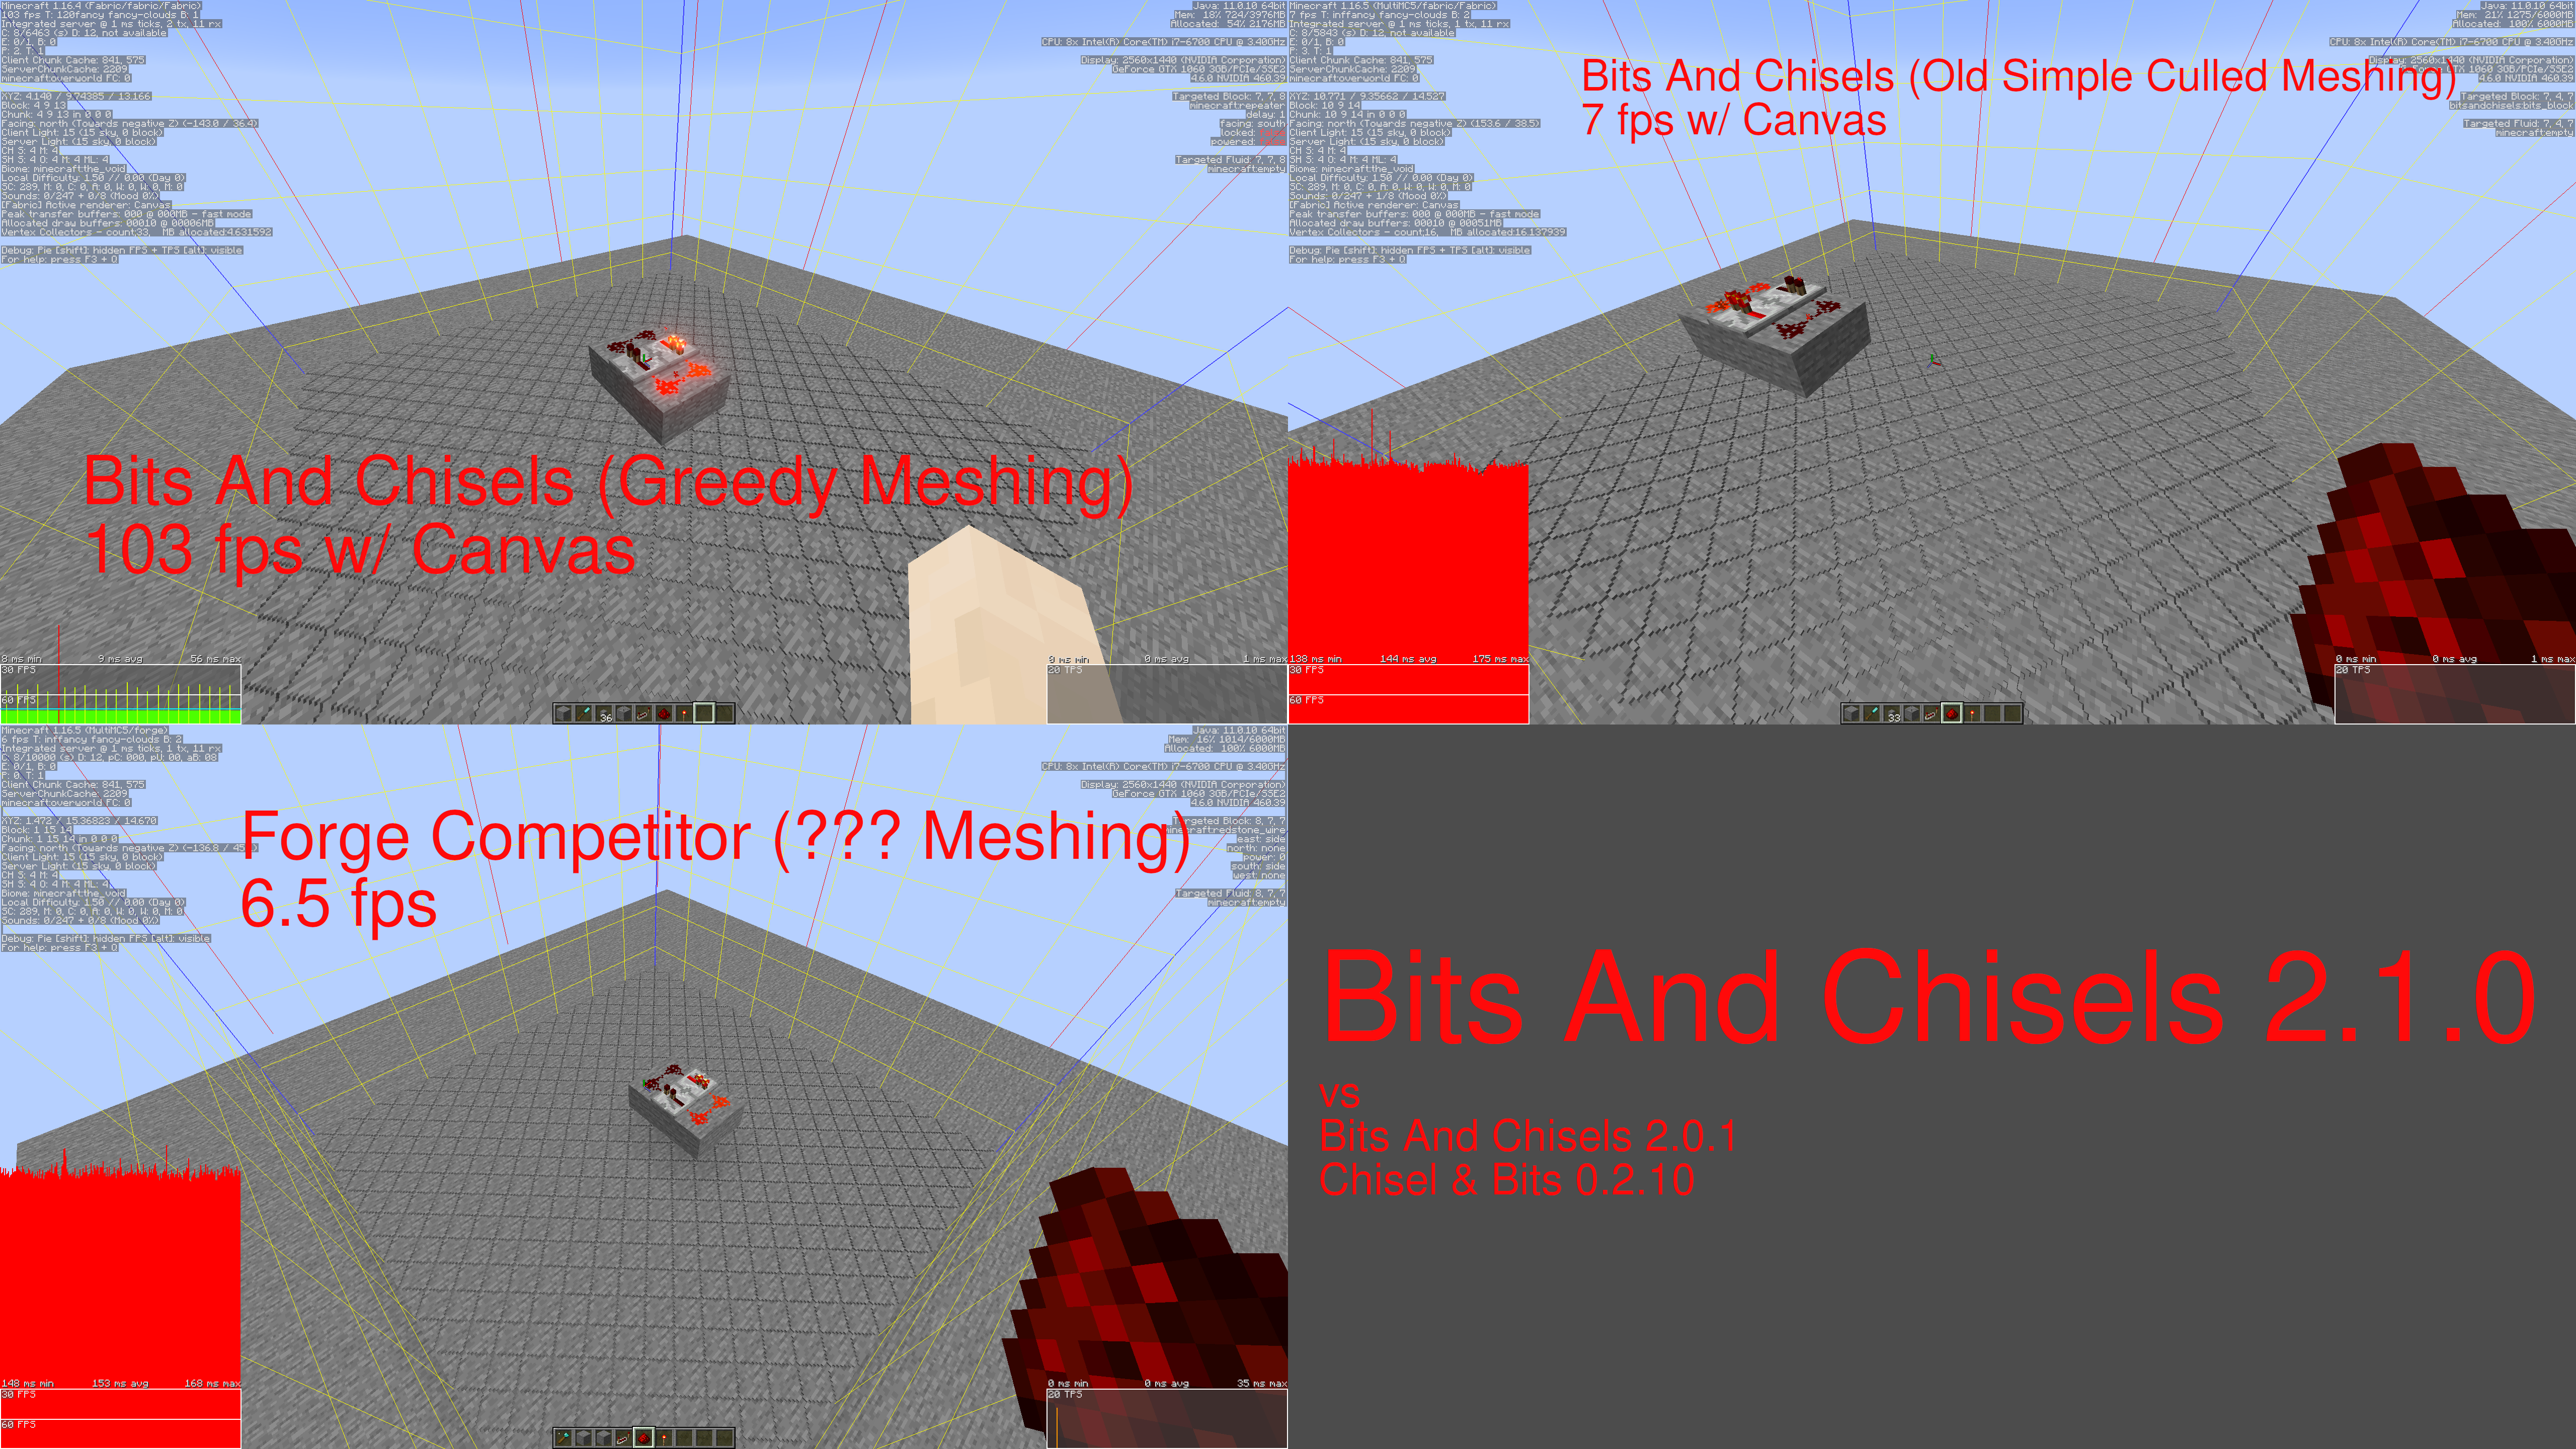 Bits And Chisels is fast :)